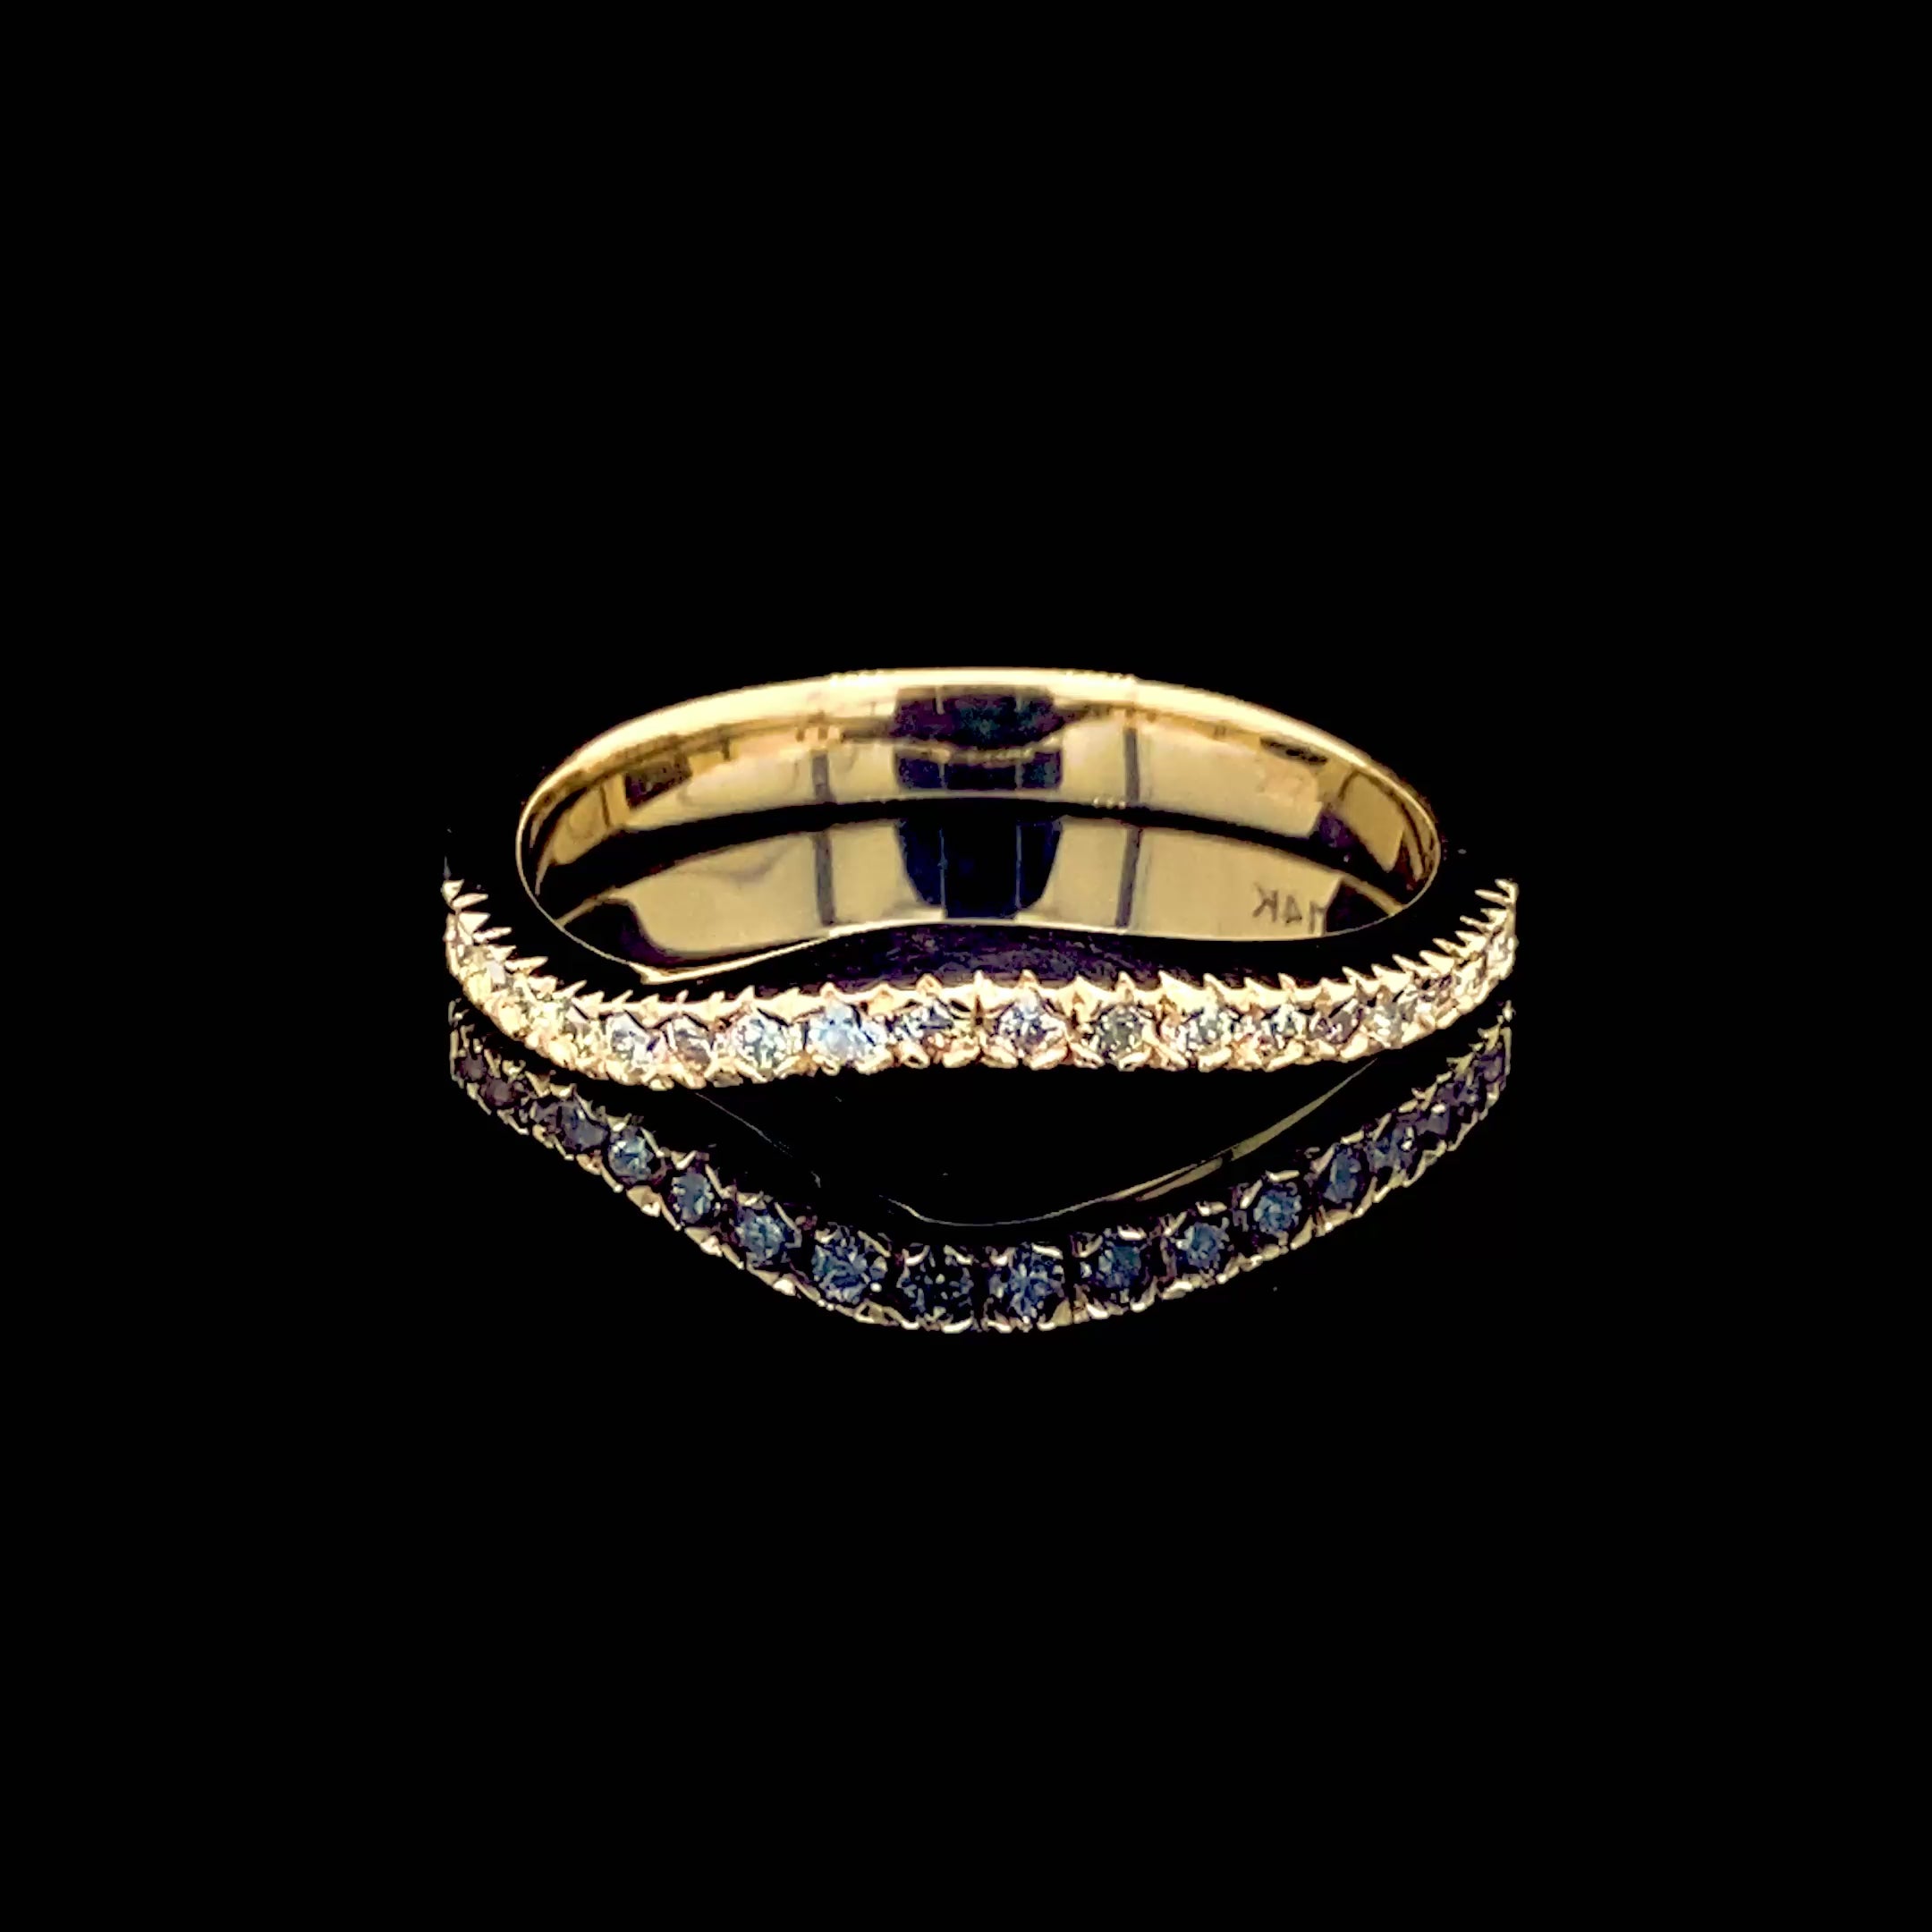 Risk-Free 0.30 CT Round Cut Diamond Wedding Band in 14KT Yellow Gold